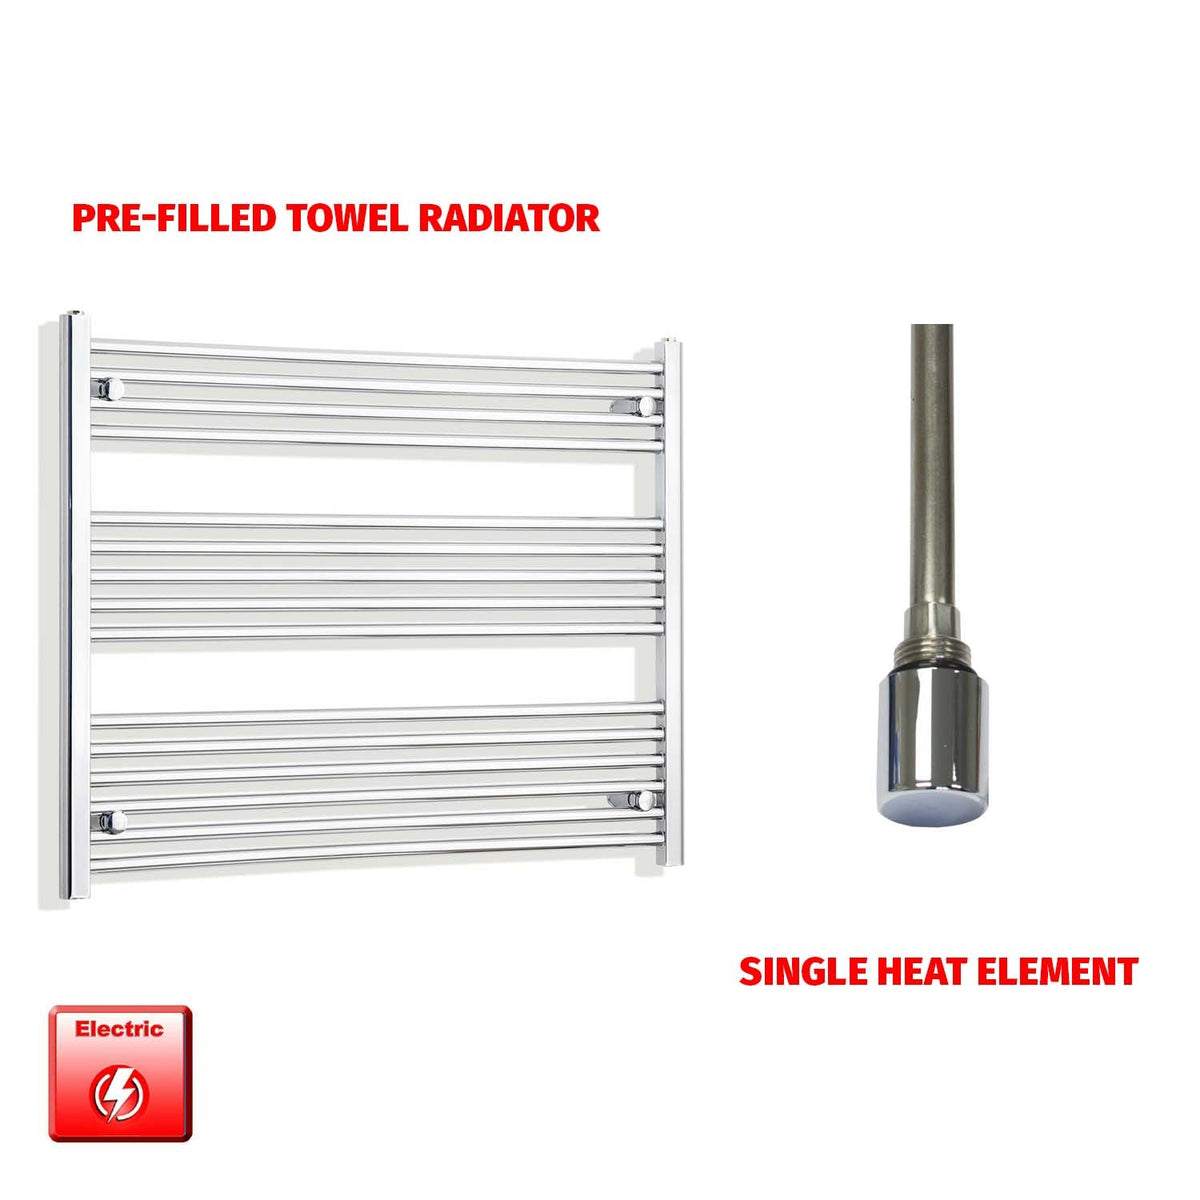 800 x 1000 Pre-Filled Electric Heated Towel Radiator Straight Chrome Single heat element no timer